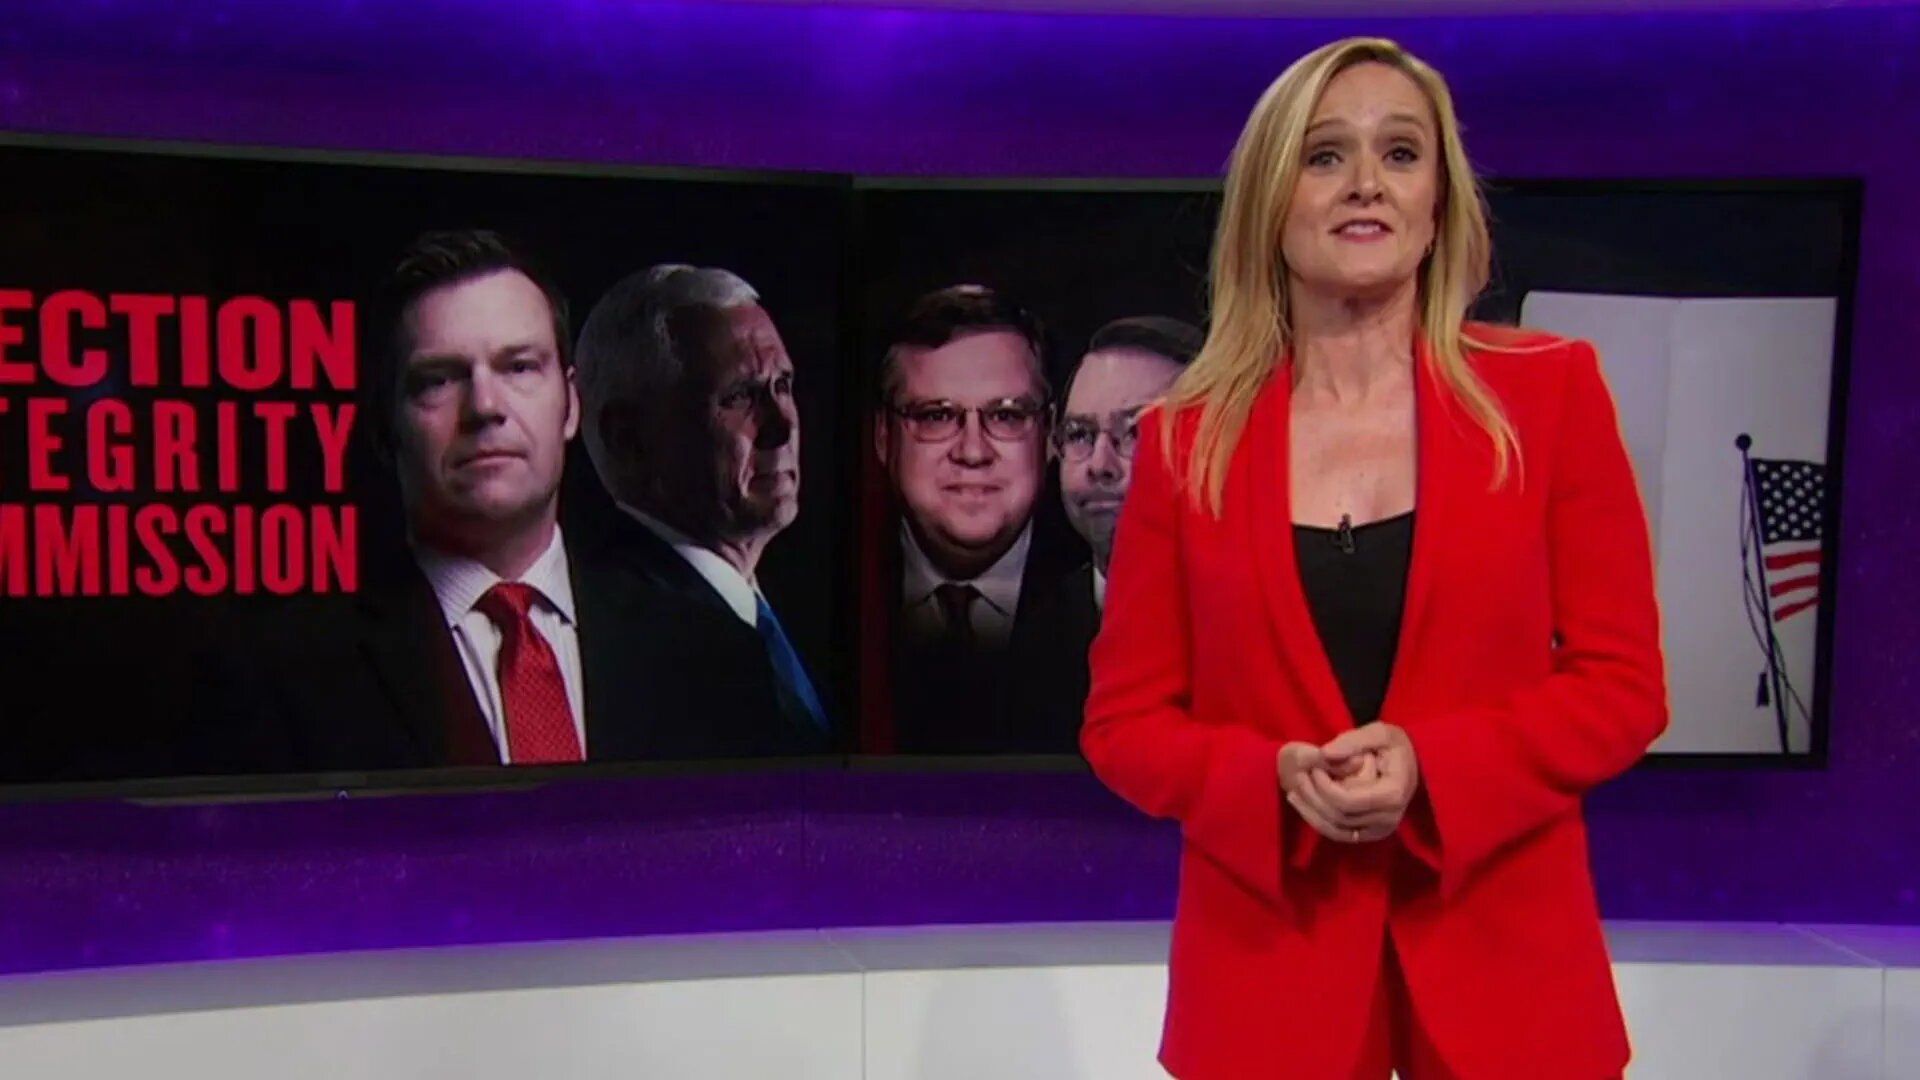 Full Frontal with Samantha Bee S2E14 July 19, 2017